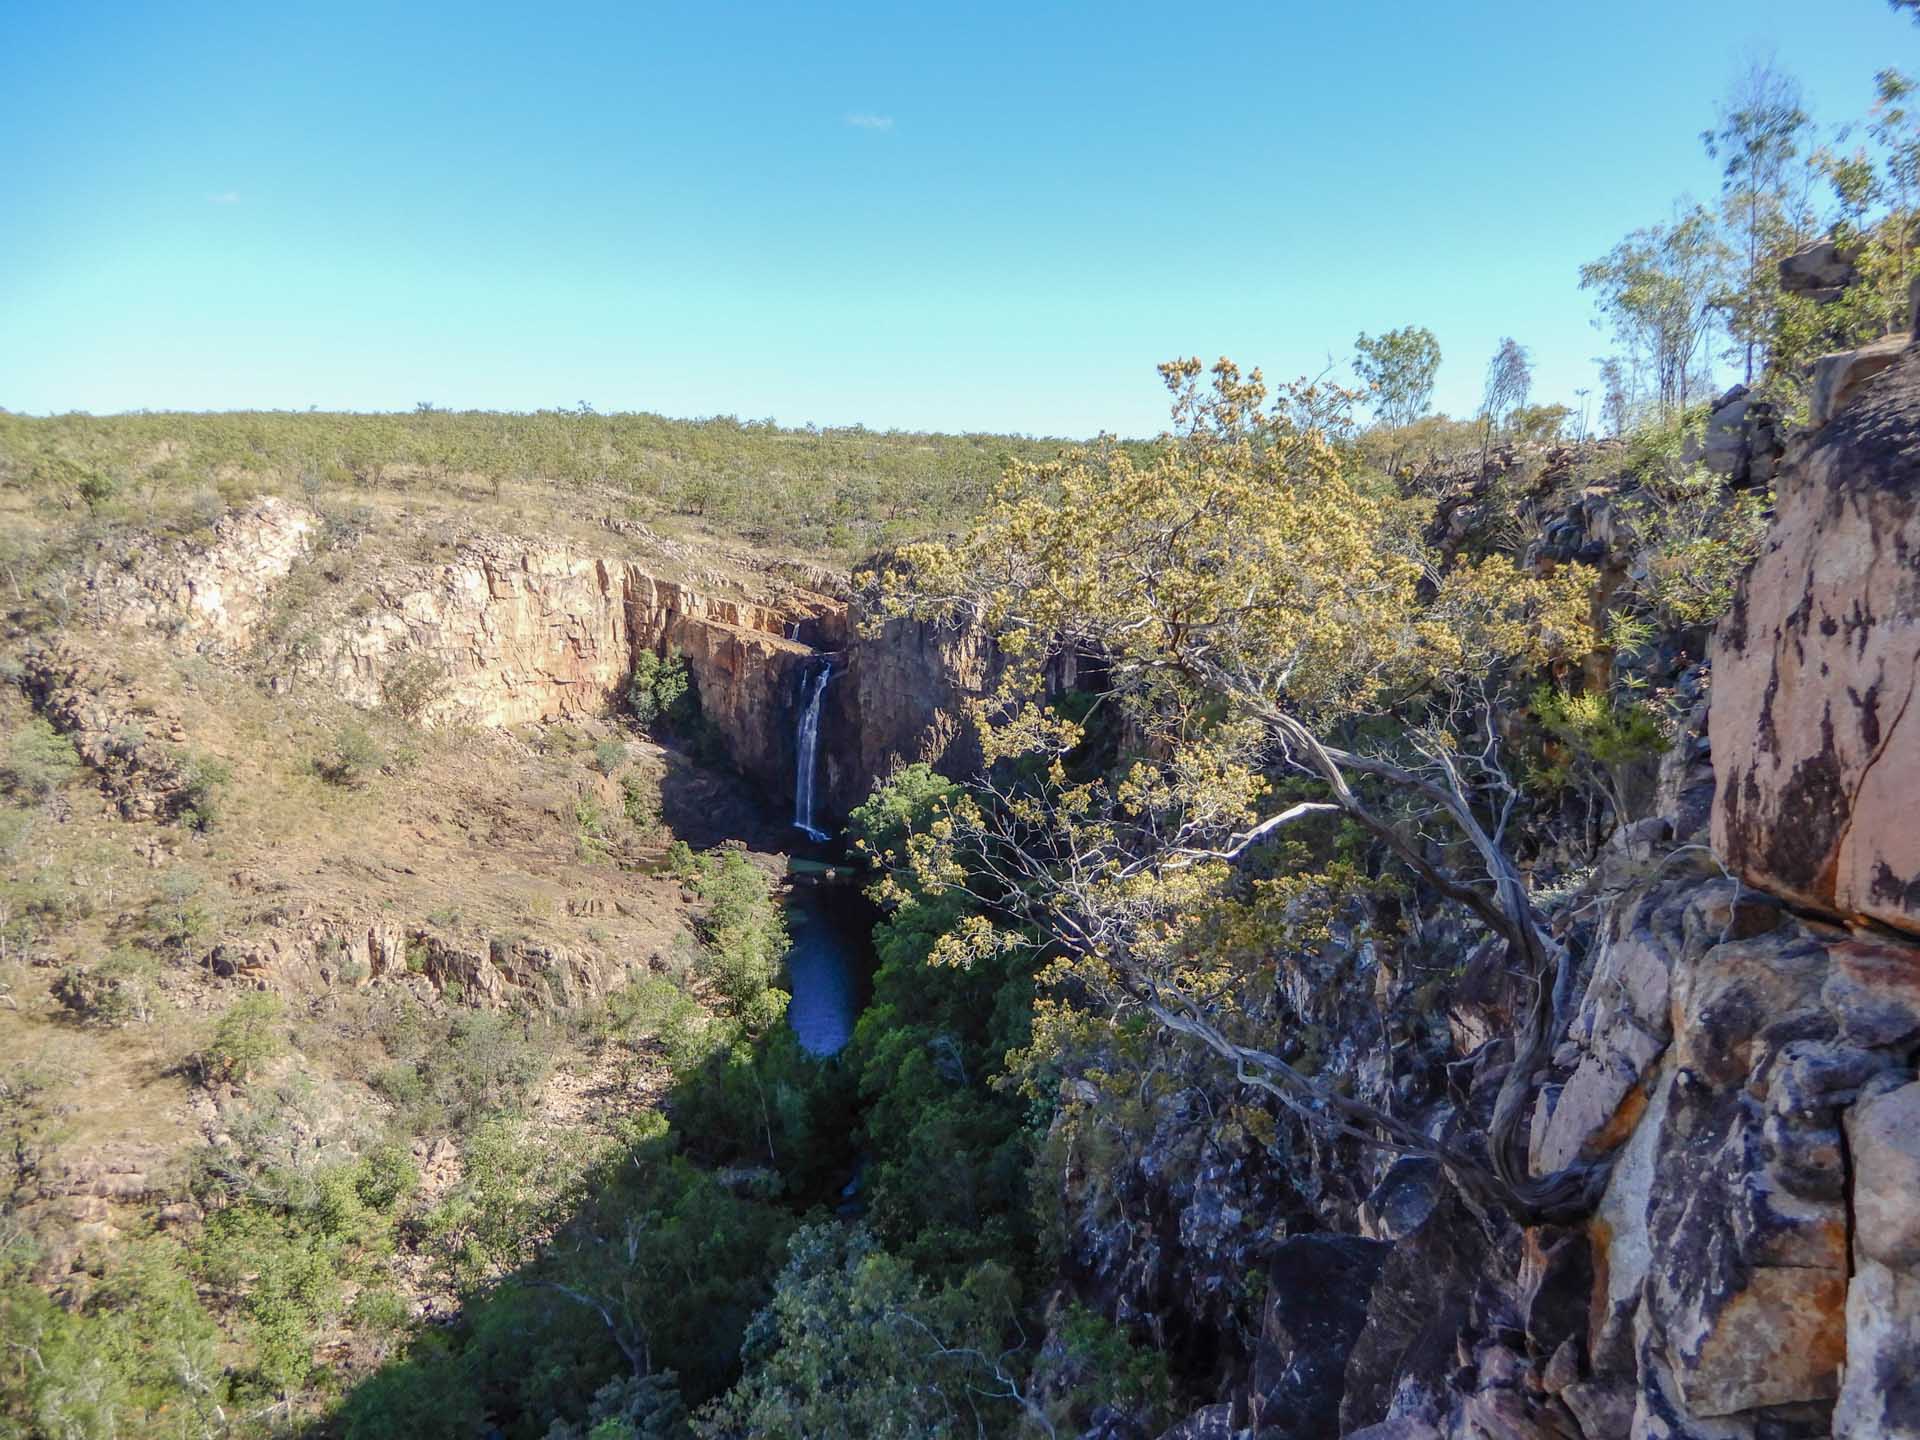 The ‘Big 3’ Hikes of the NT: How Do They Compare?, hiking, northern territory, jatbula trail, mountains, indigenous culture, multi-day hike, waterfall along the jatbula trail